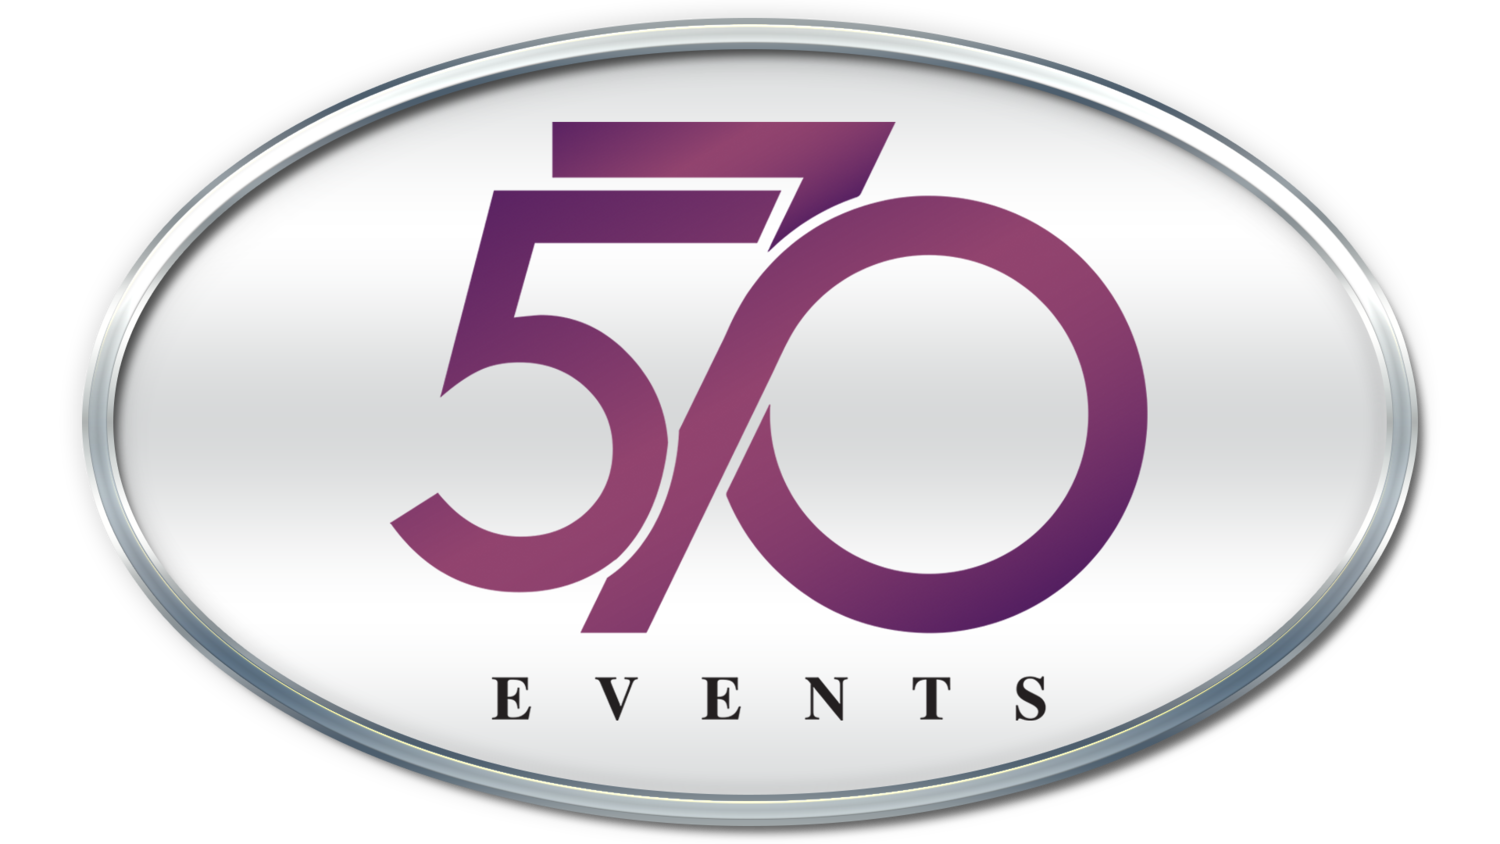 570 EVENTS